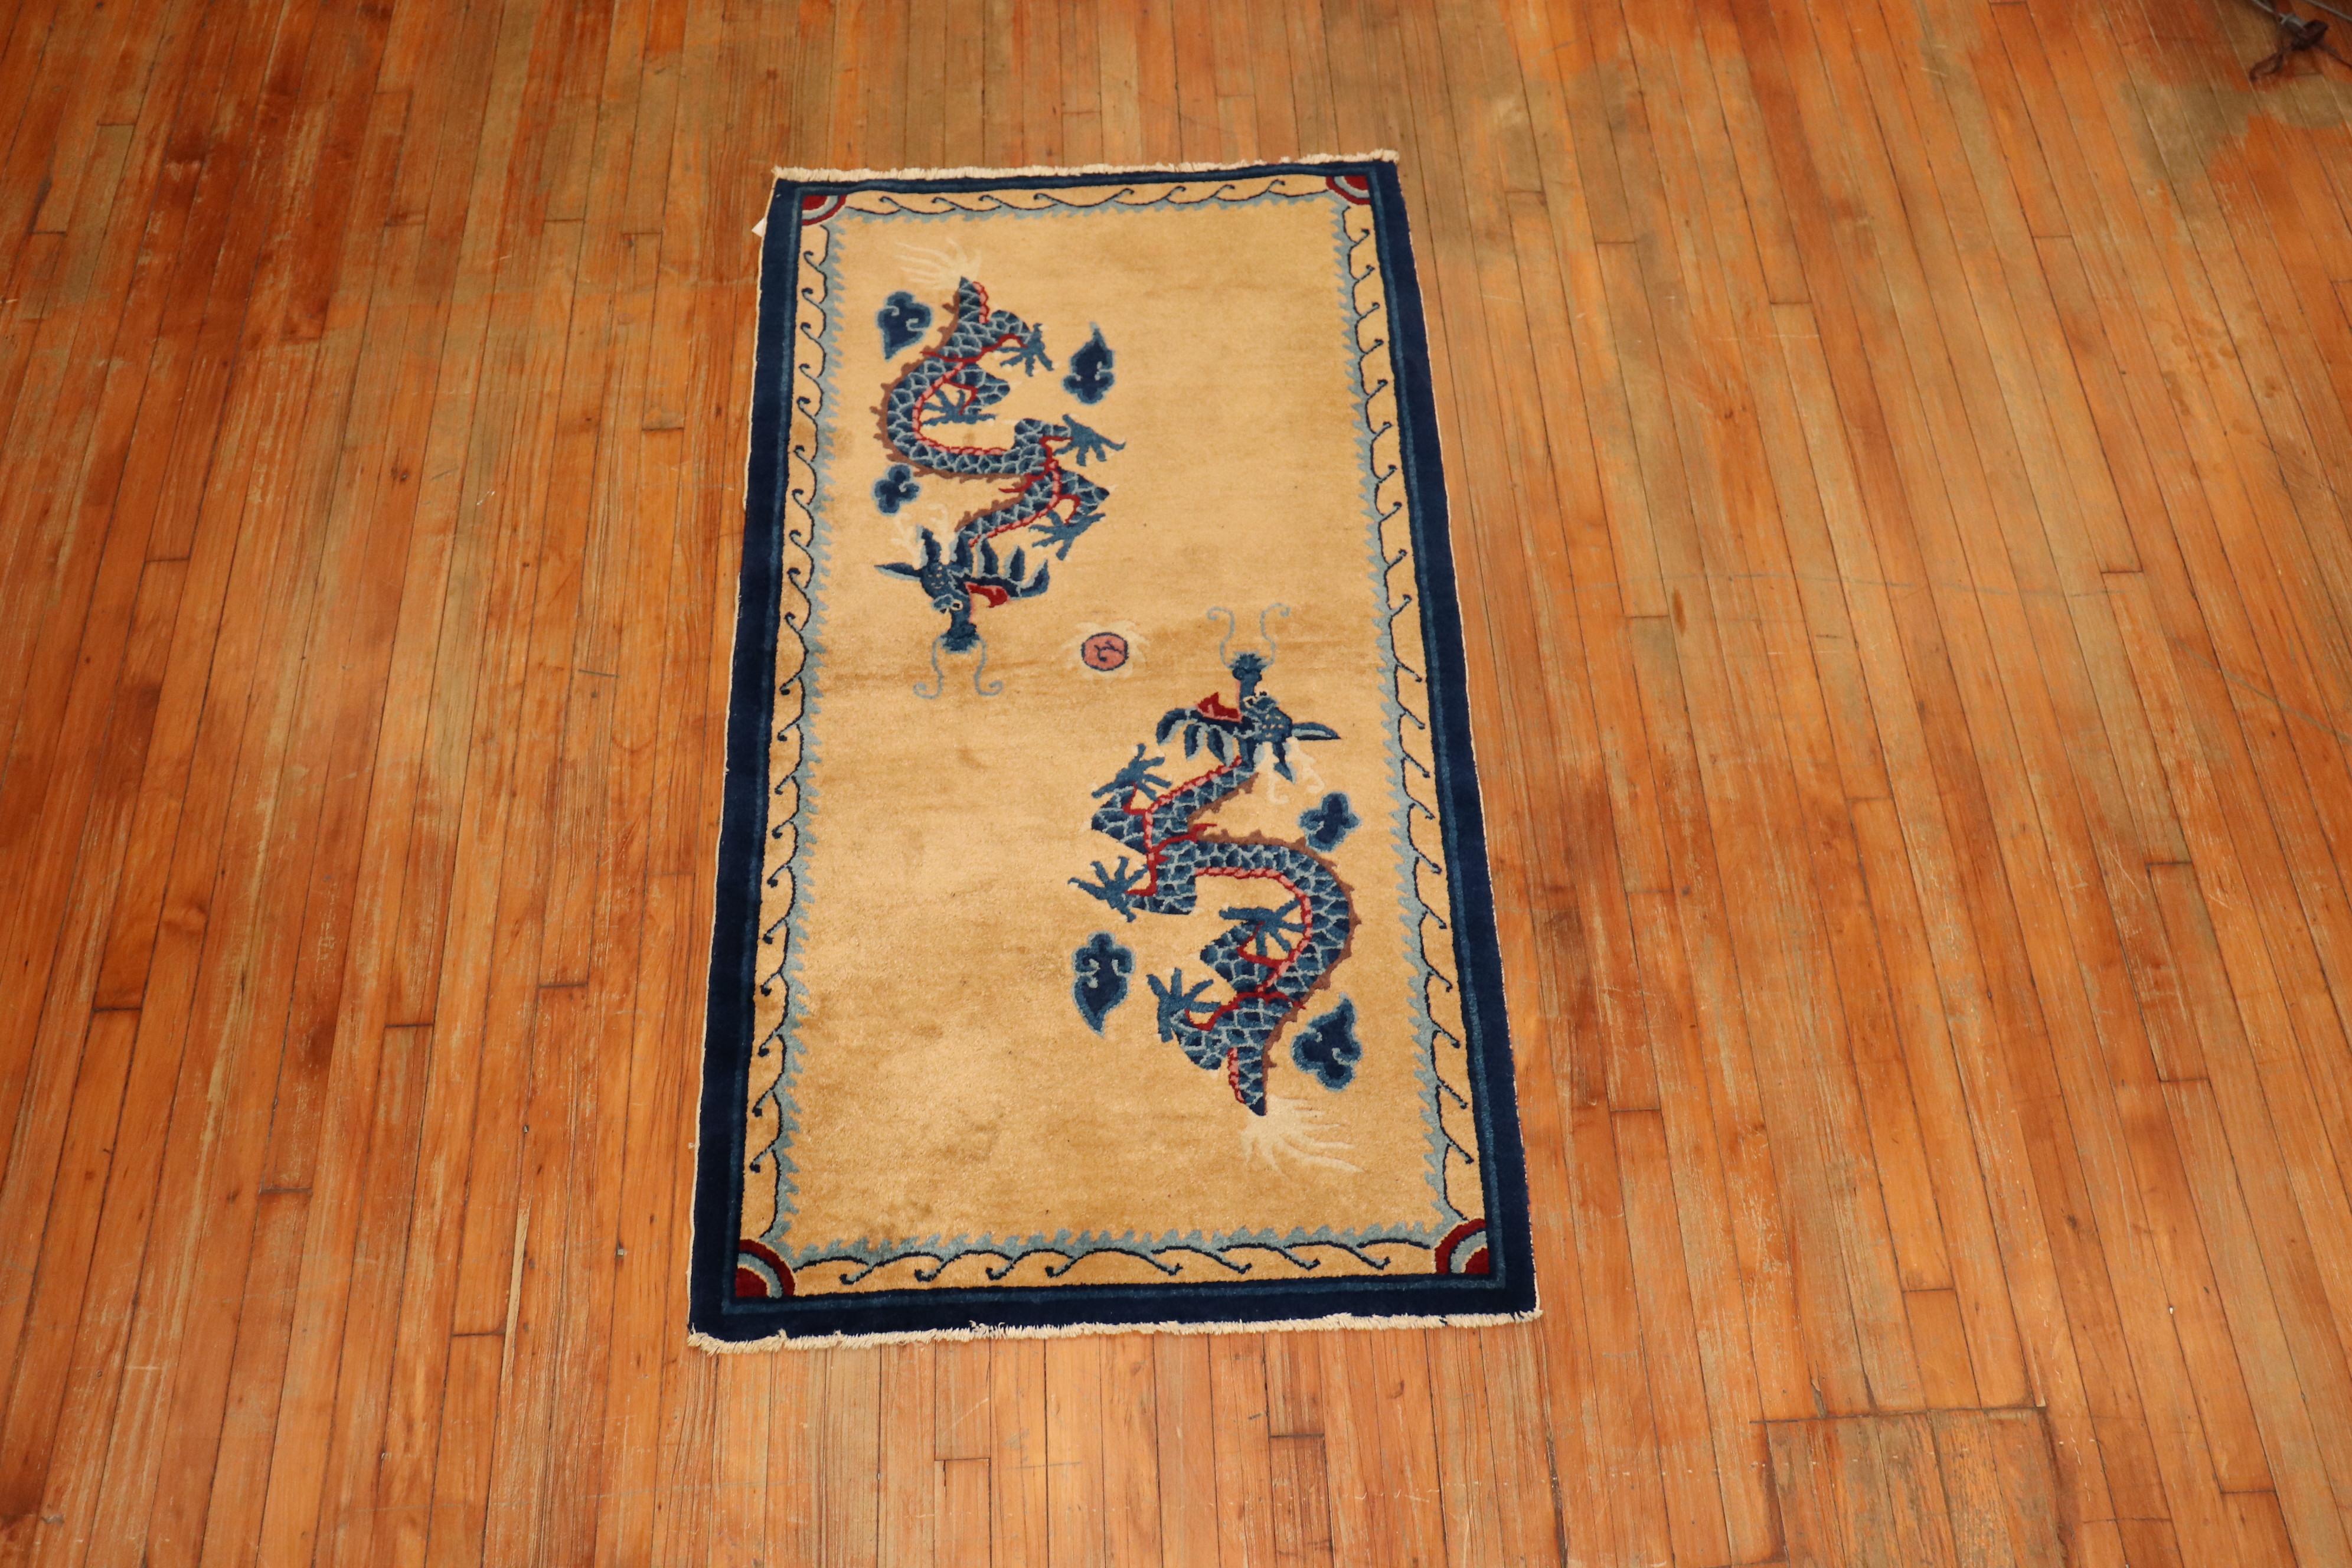 A vintage Tibetan rug from the mid-20th century with 2 blue dragons floating on a beige ground.

Measures: 3' x 5'8